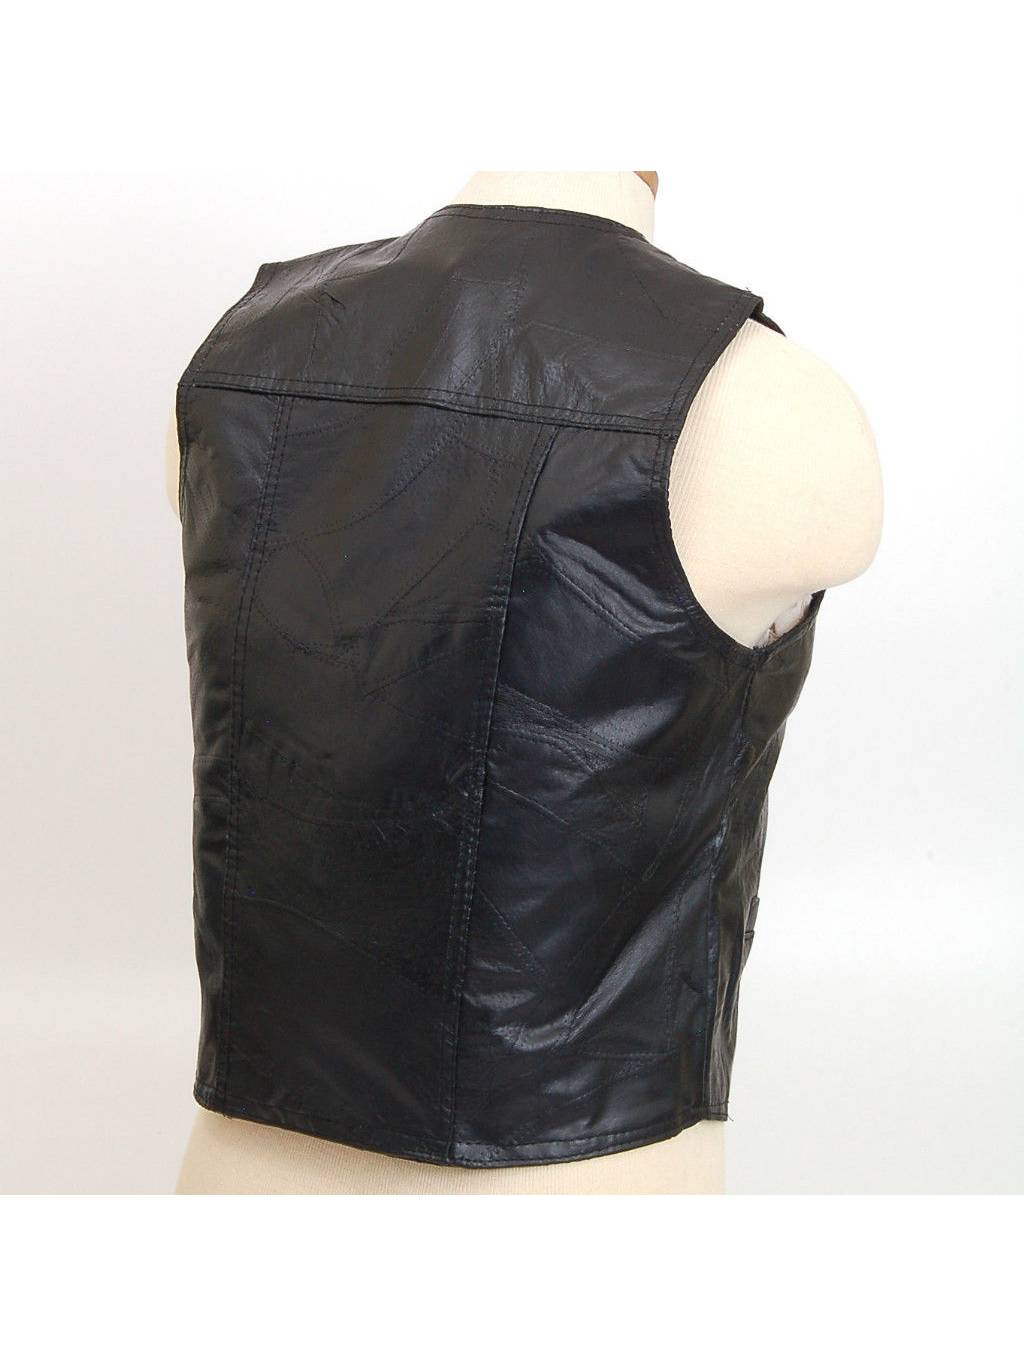 Giovanni Italian Leather Trench Coat - Small (pack Of 1) - image 3 of 6